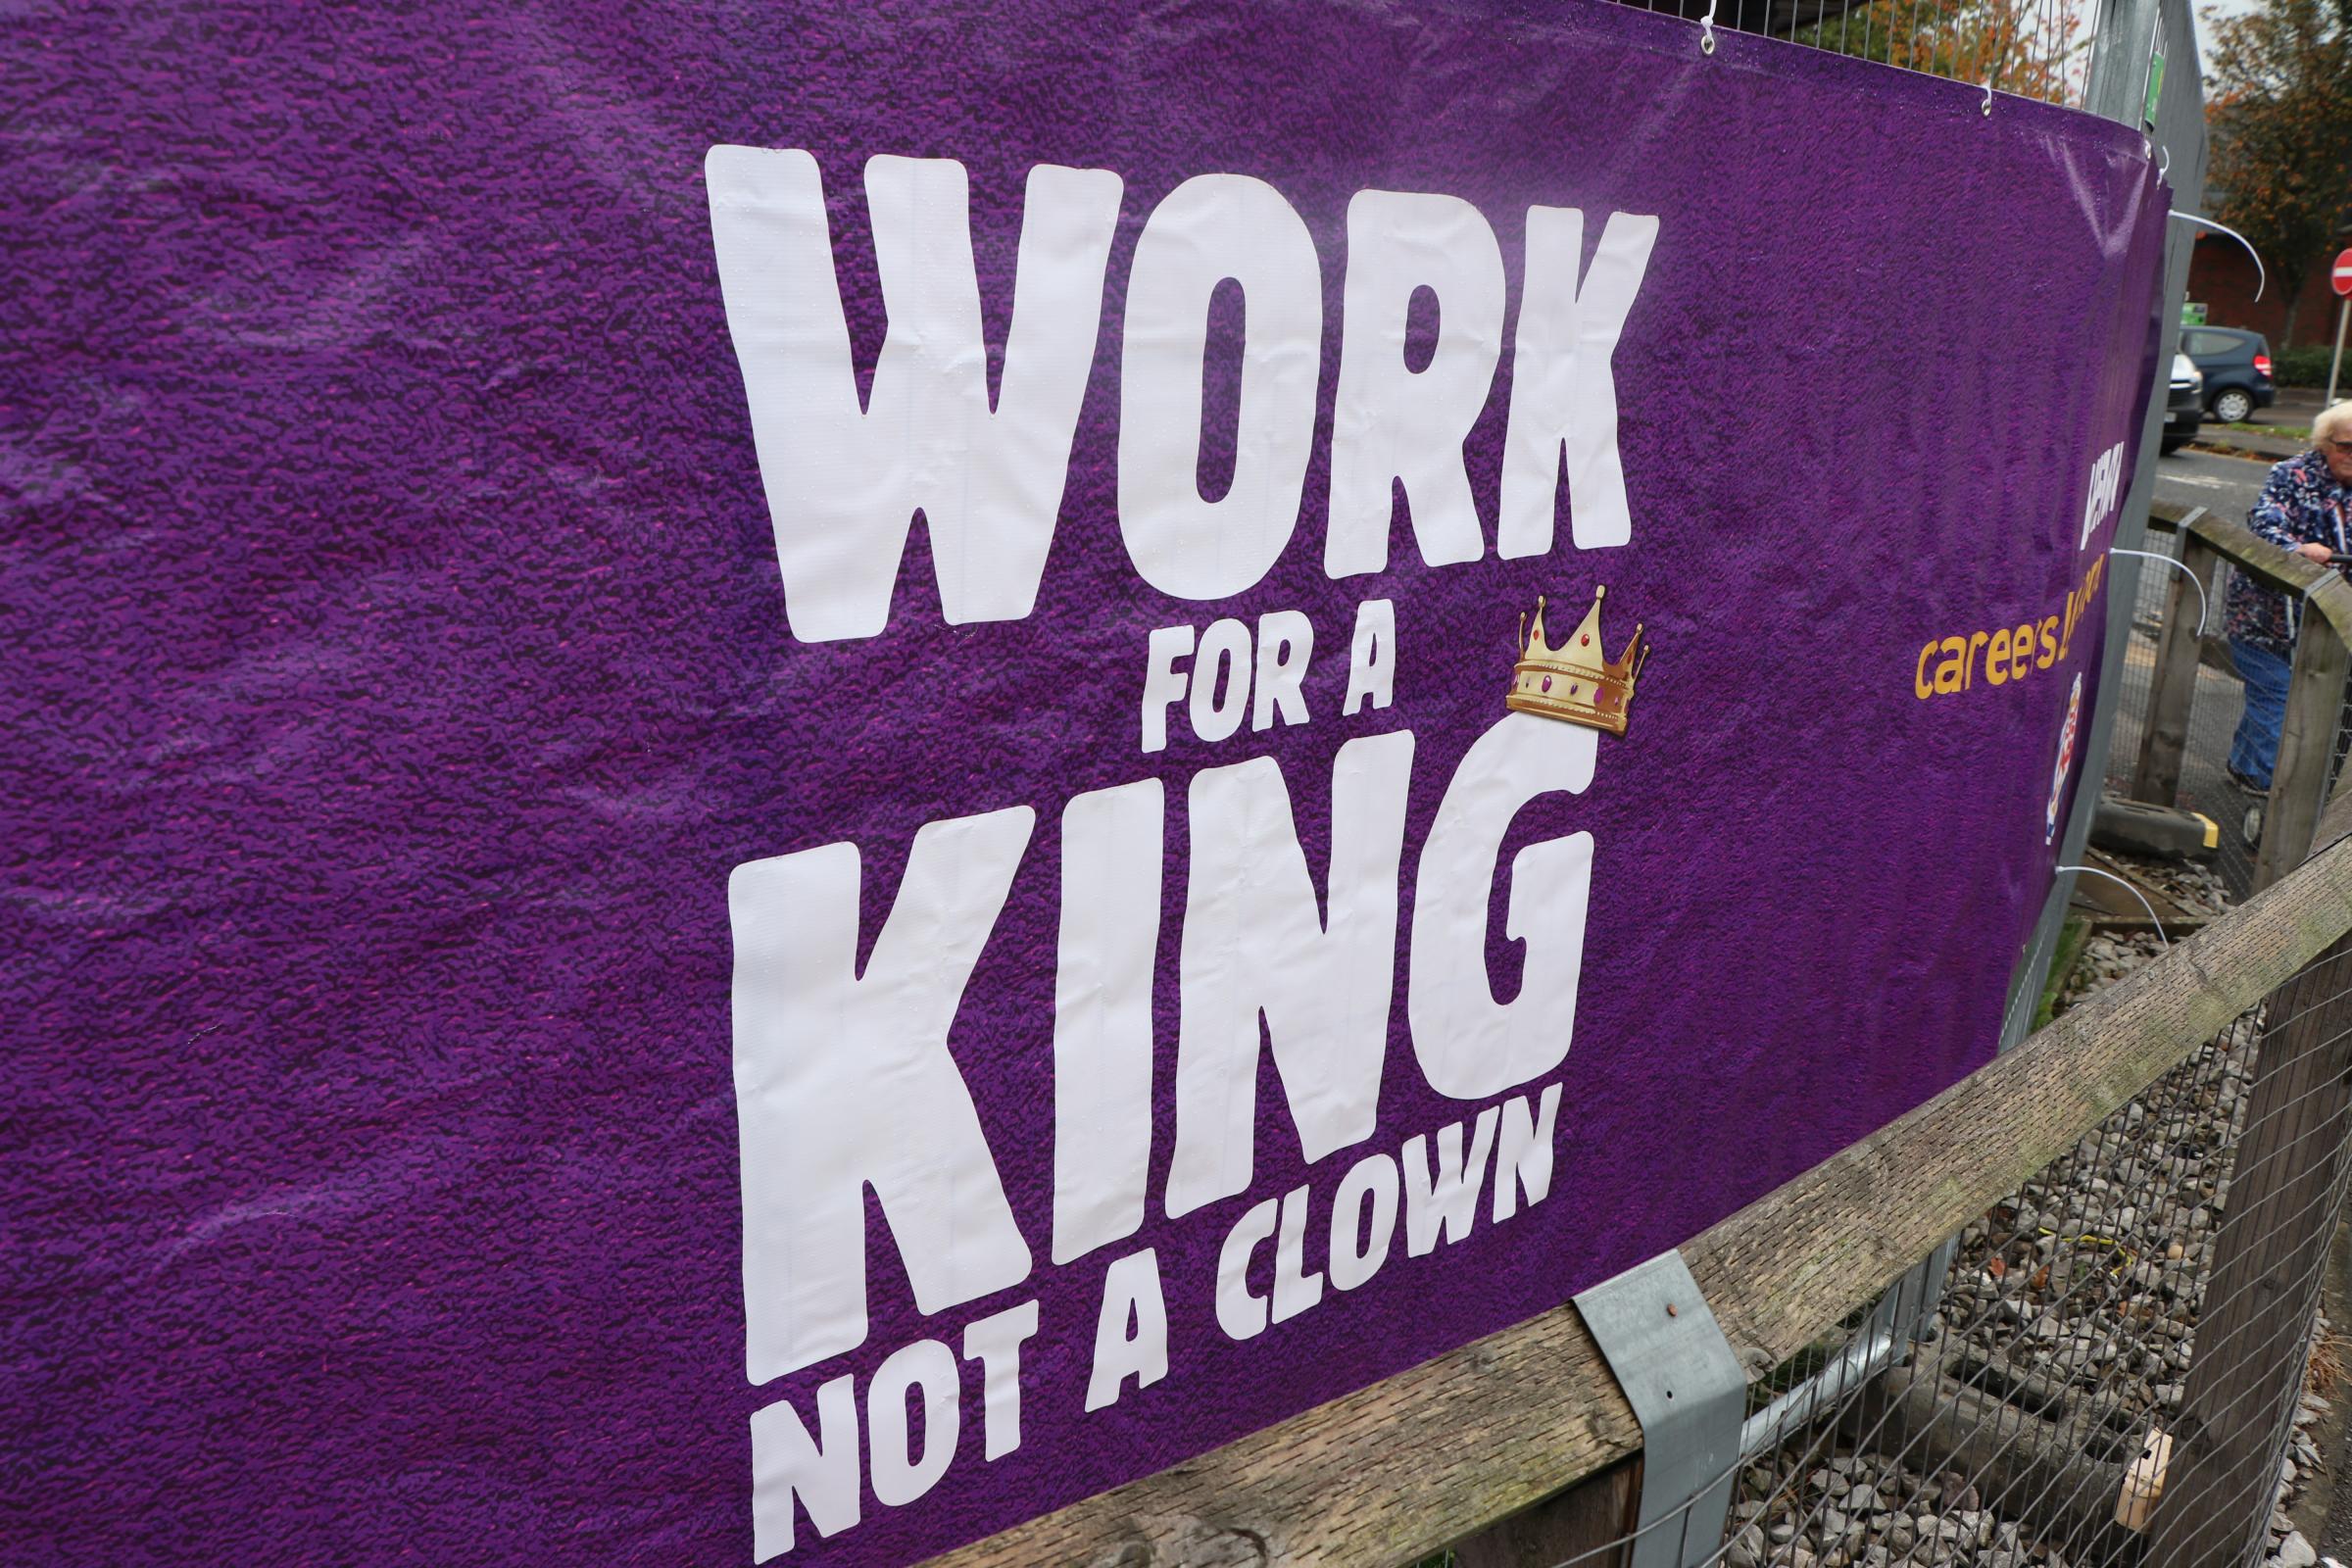 Burger King takes a cheeky swipe at their rival with a recruitment drive for the forthcoming Bromborough oultet